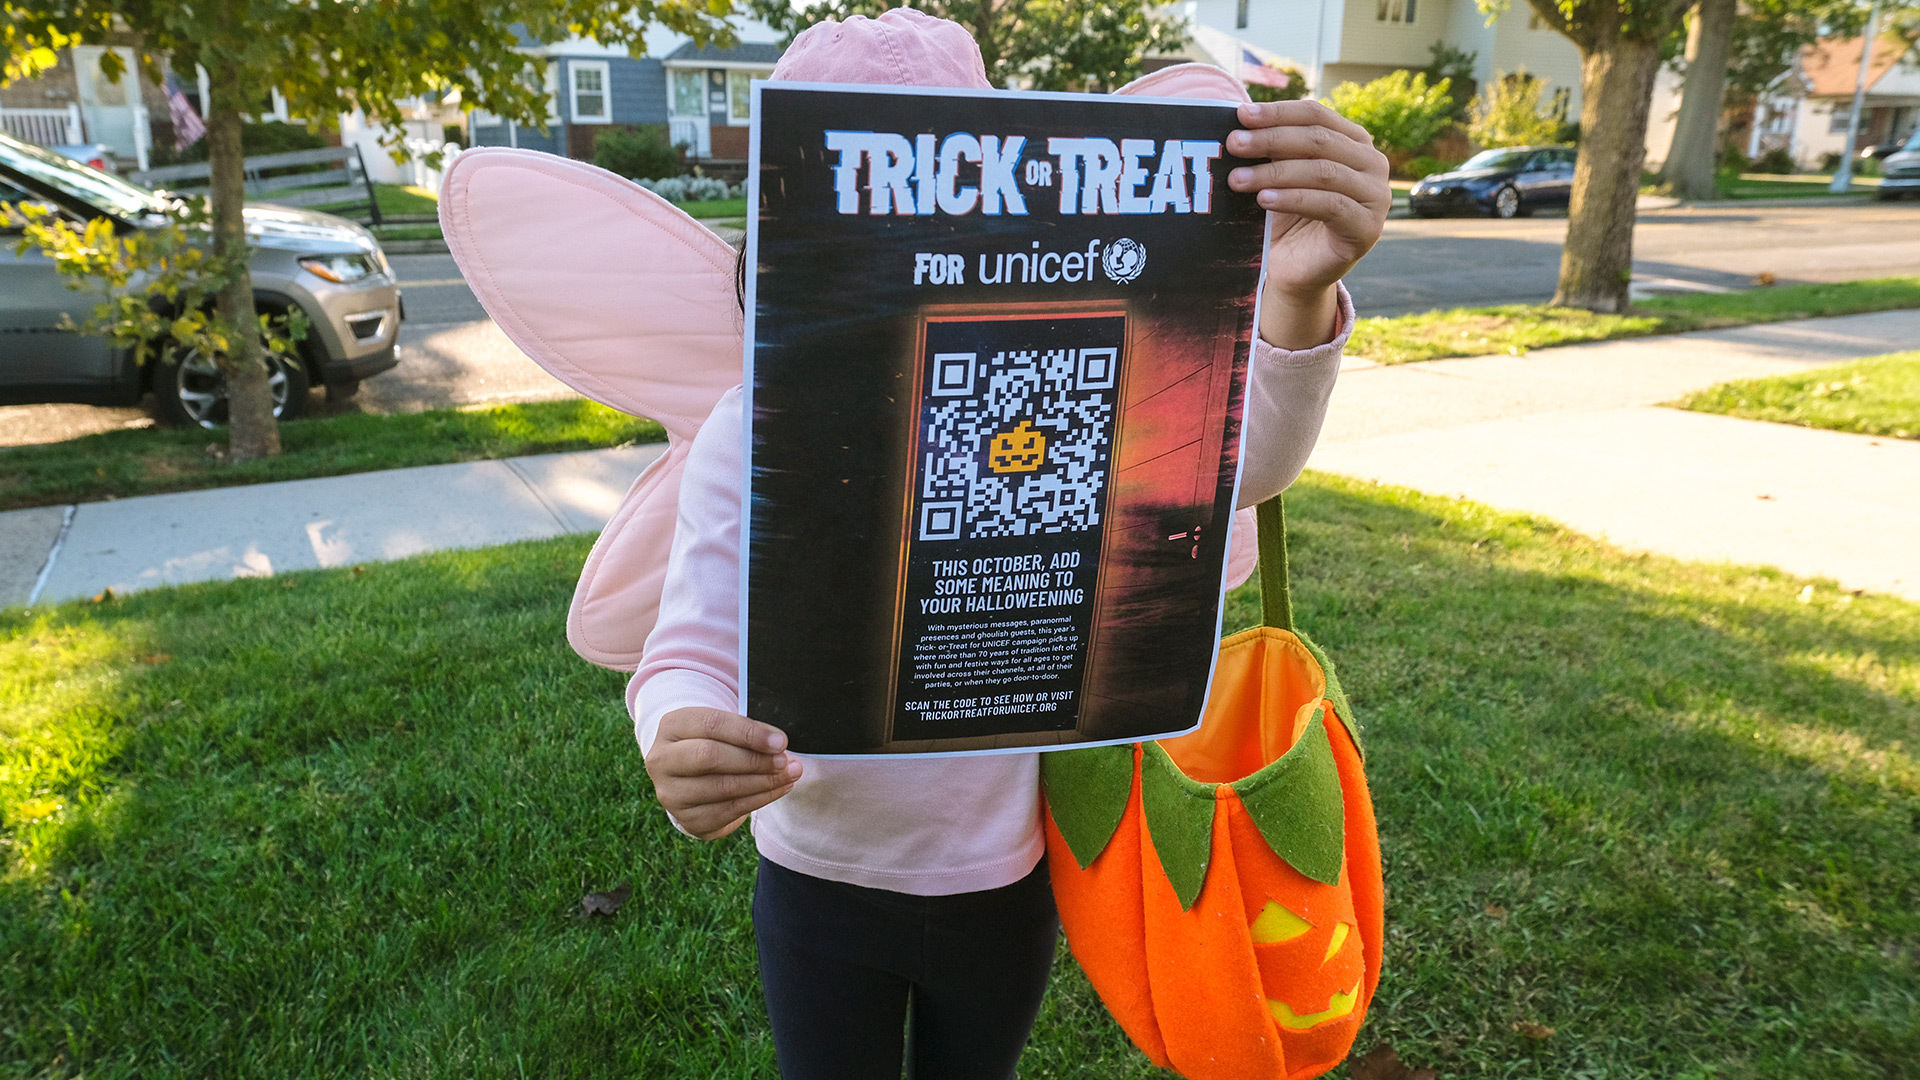 A child in a fairy costume holds up a poster of the Trick-or-Treat for UNICEF QR code